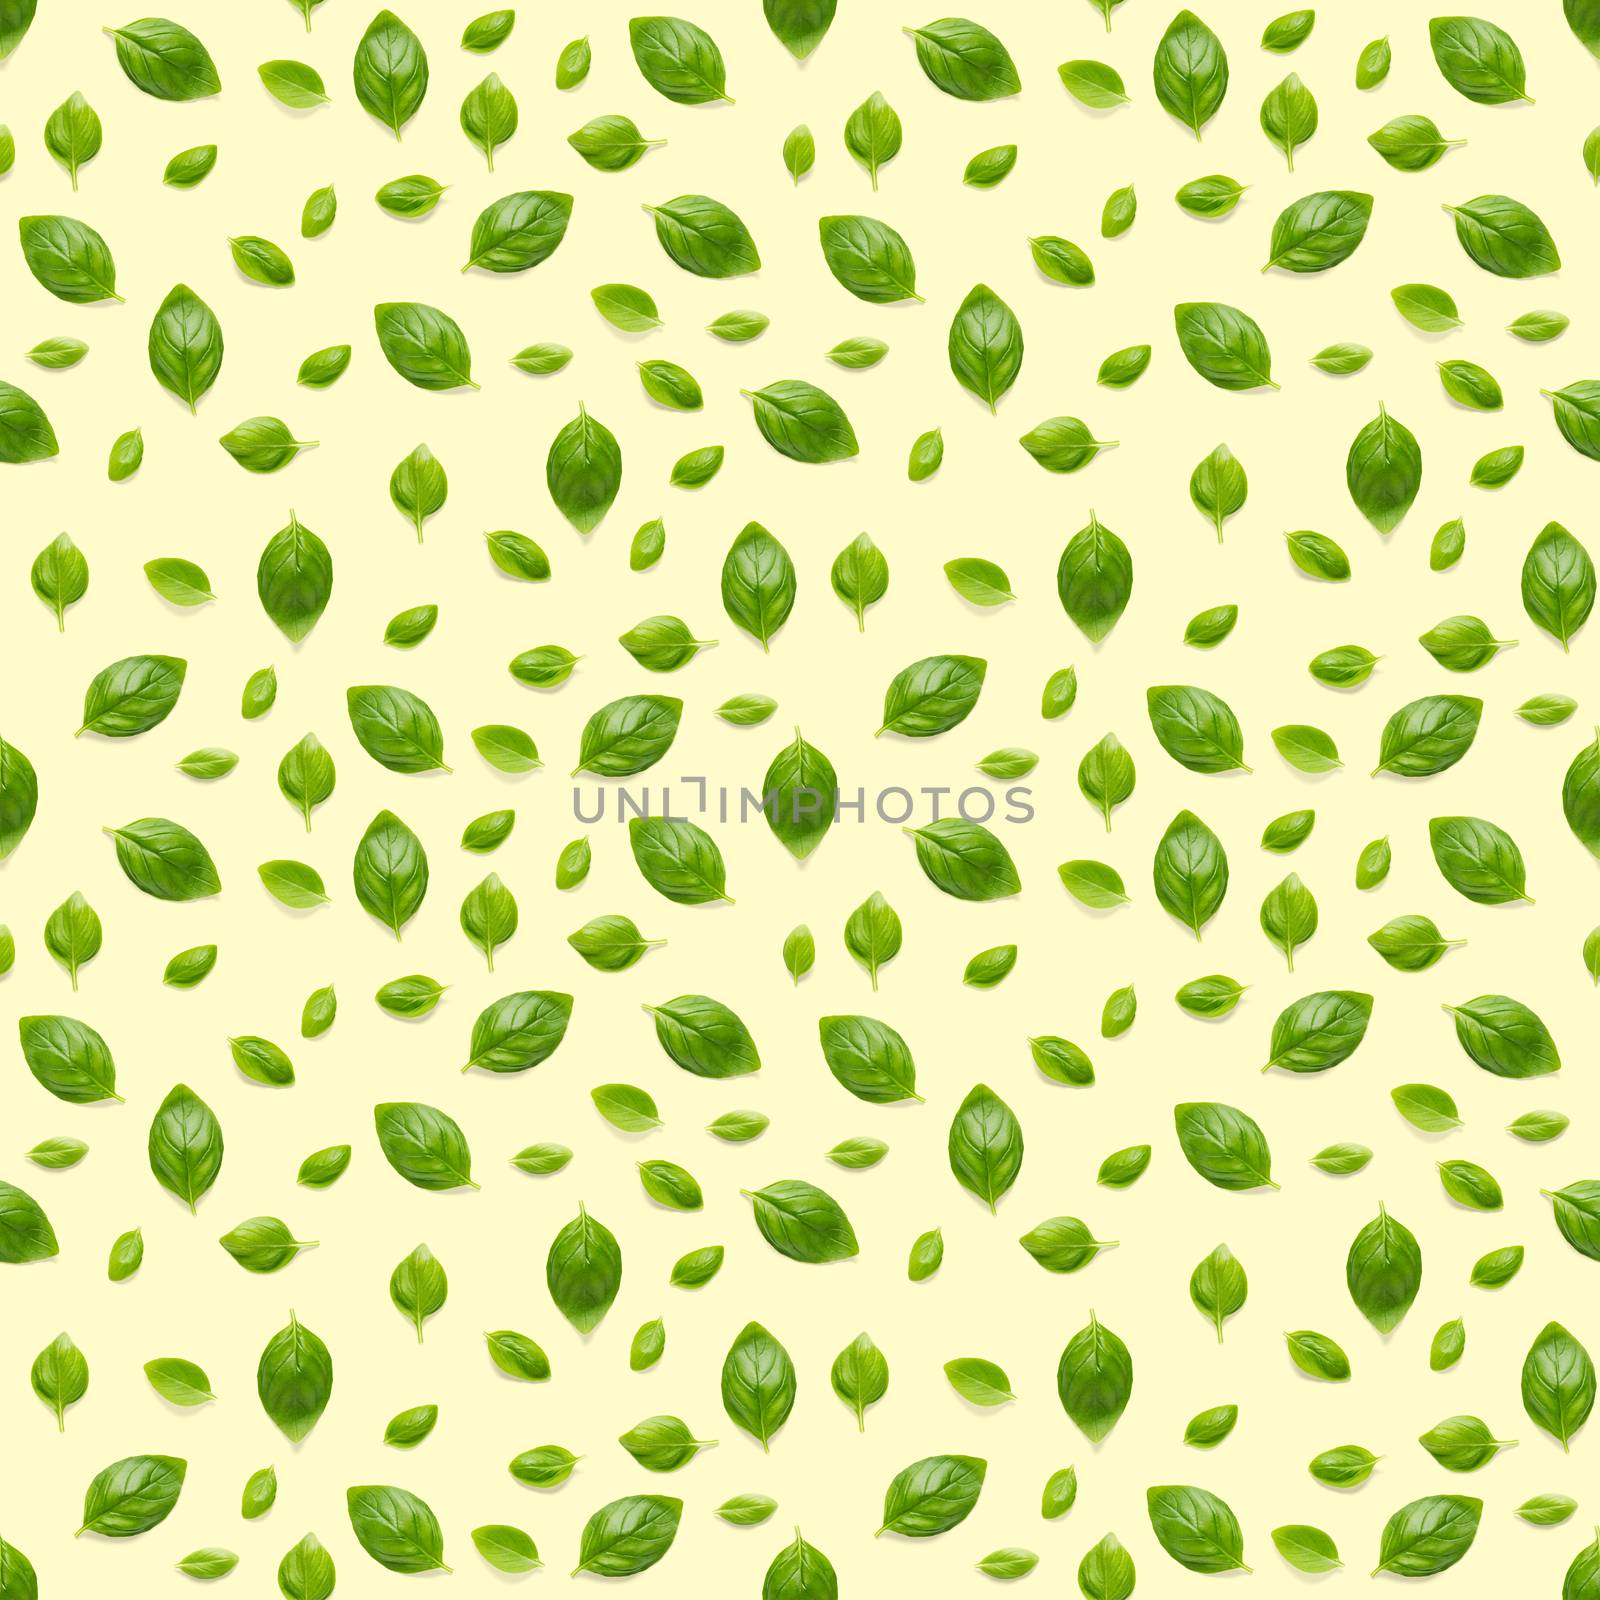 Italian Basil leaf herb seamless pattern on yellow background, Creative seamless pattern made from fresh green basil flat lay layout. by PhotoTime